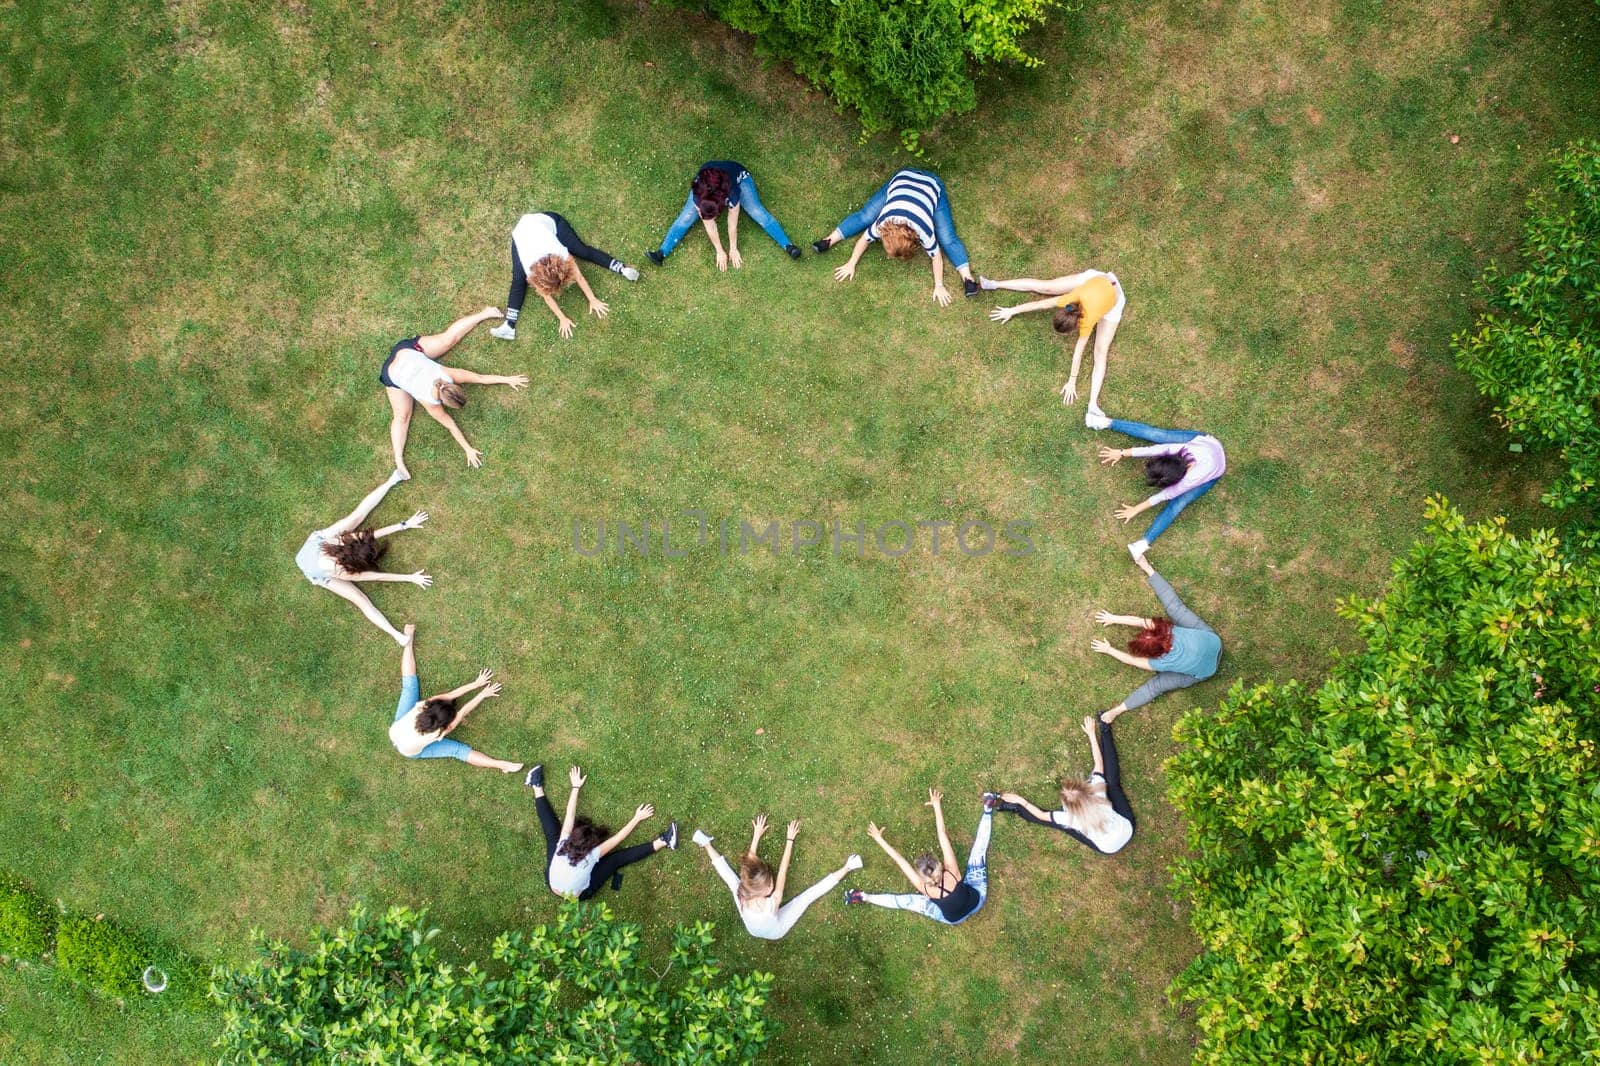 Top view of people standing in circle on green grass doing exercises